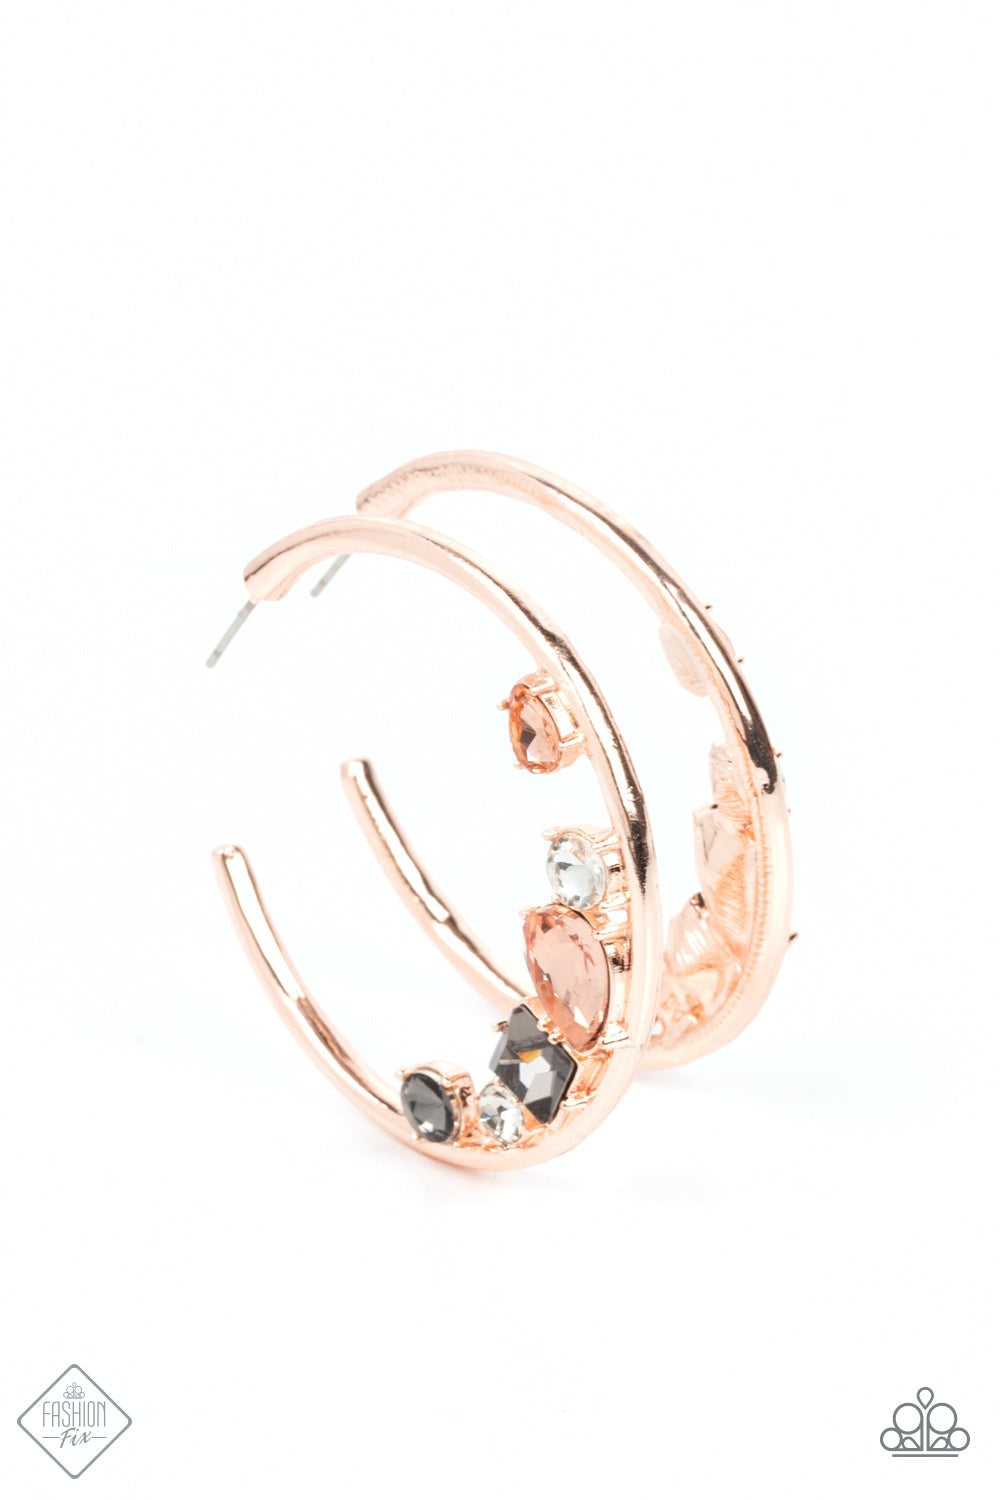 ATTRACTIVE ALLURE ROSEGOLD-EARRINGS